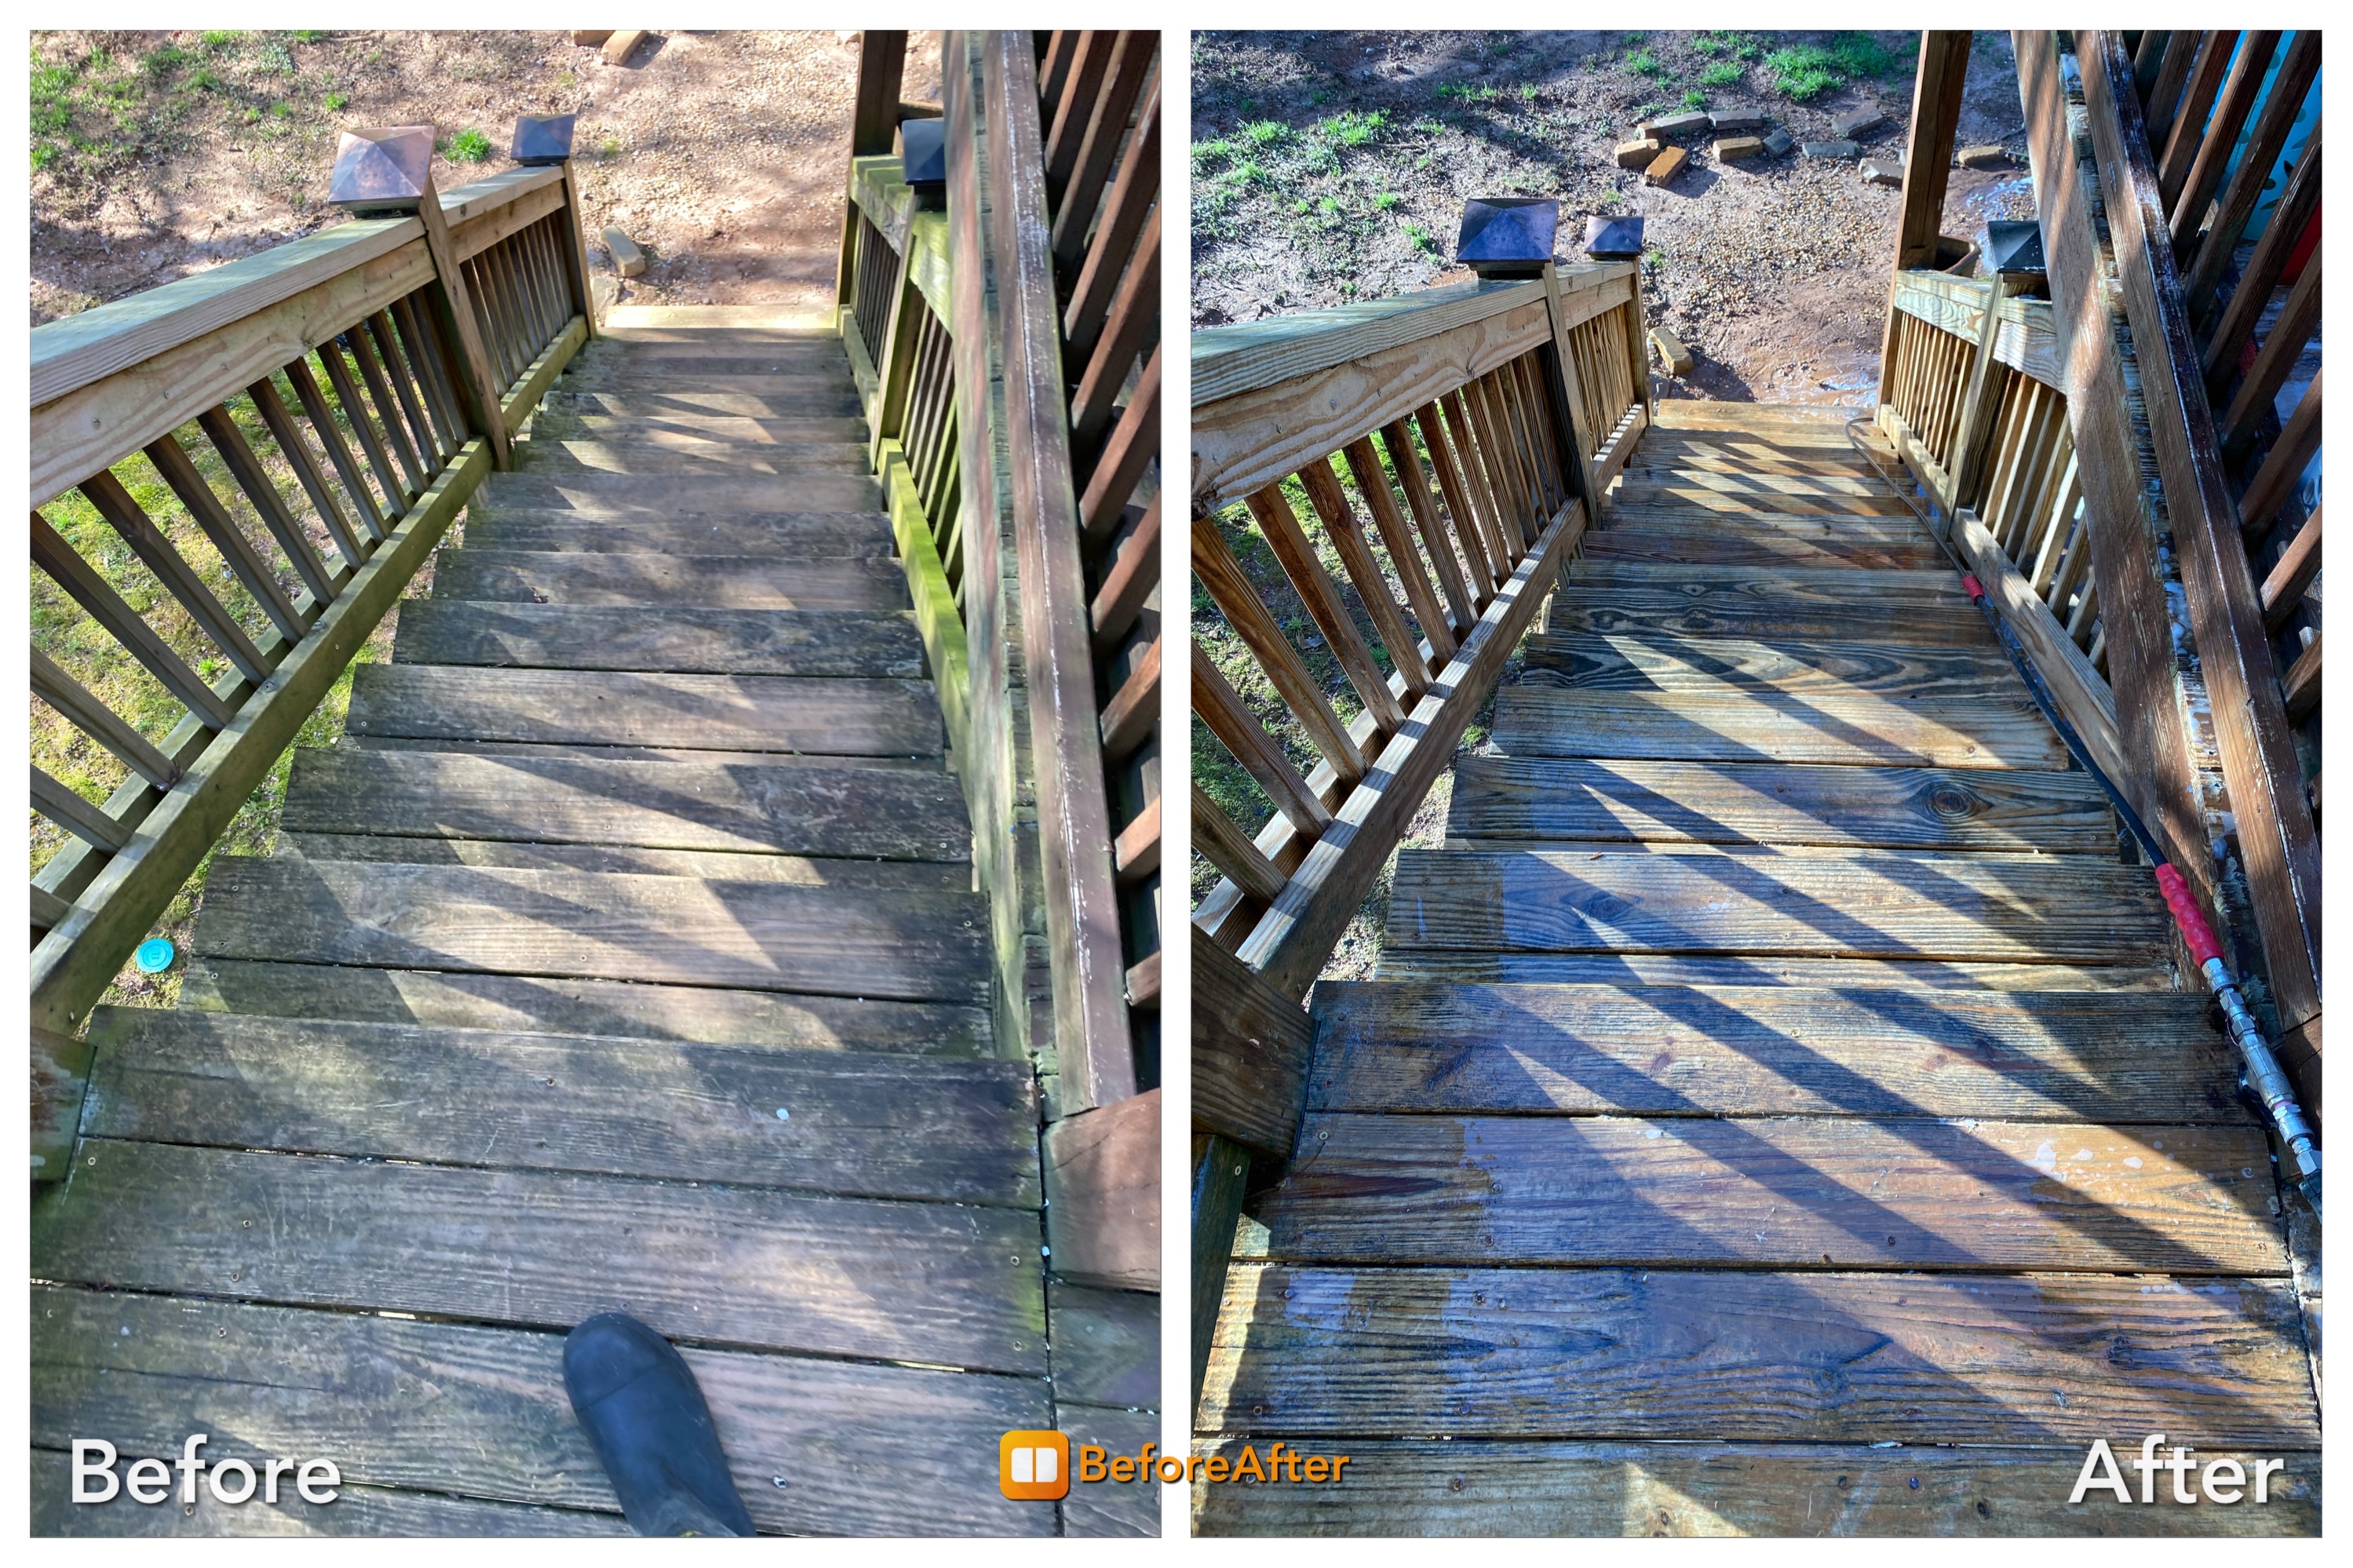 Algae stained wood railing and steps